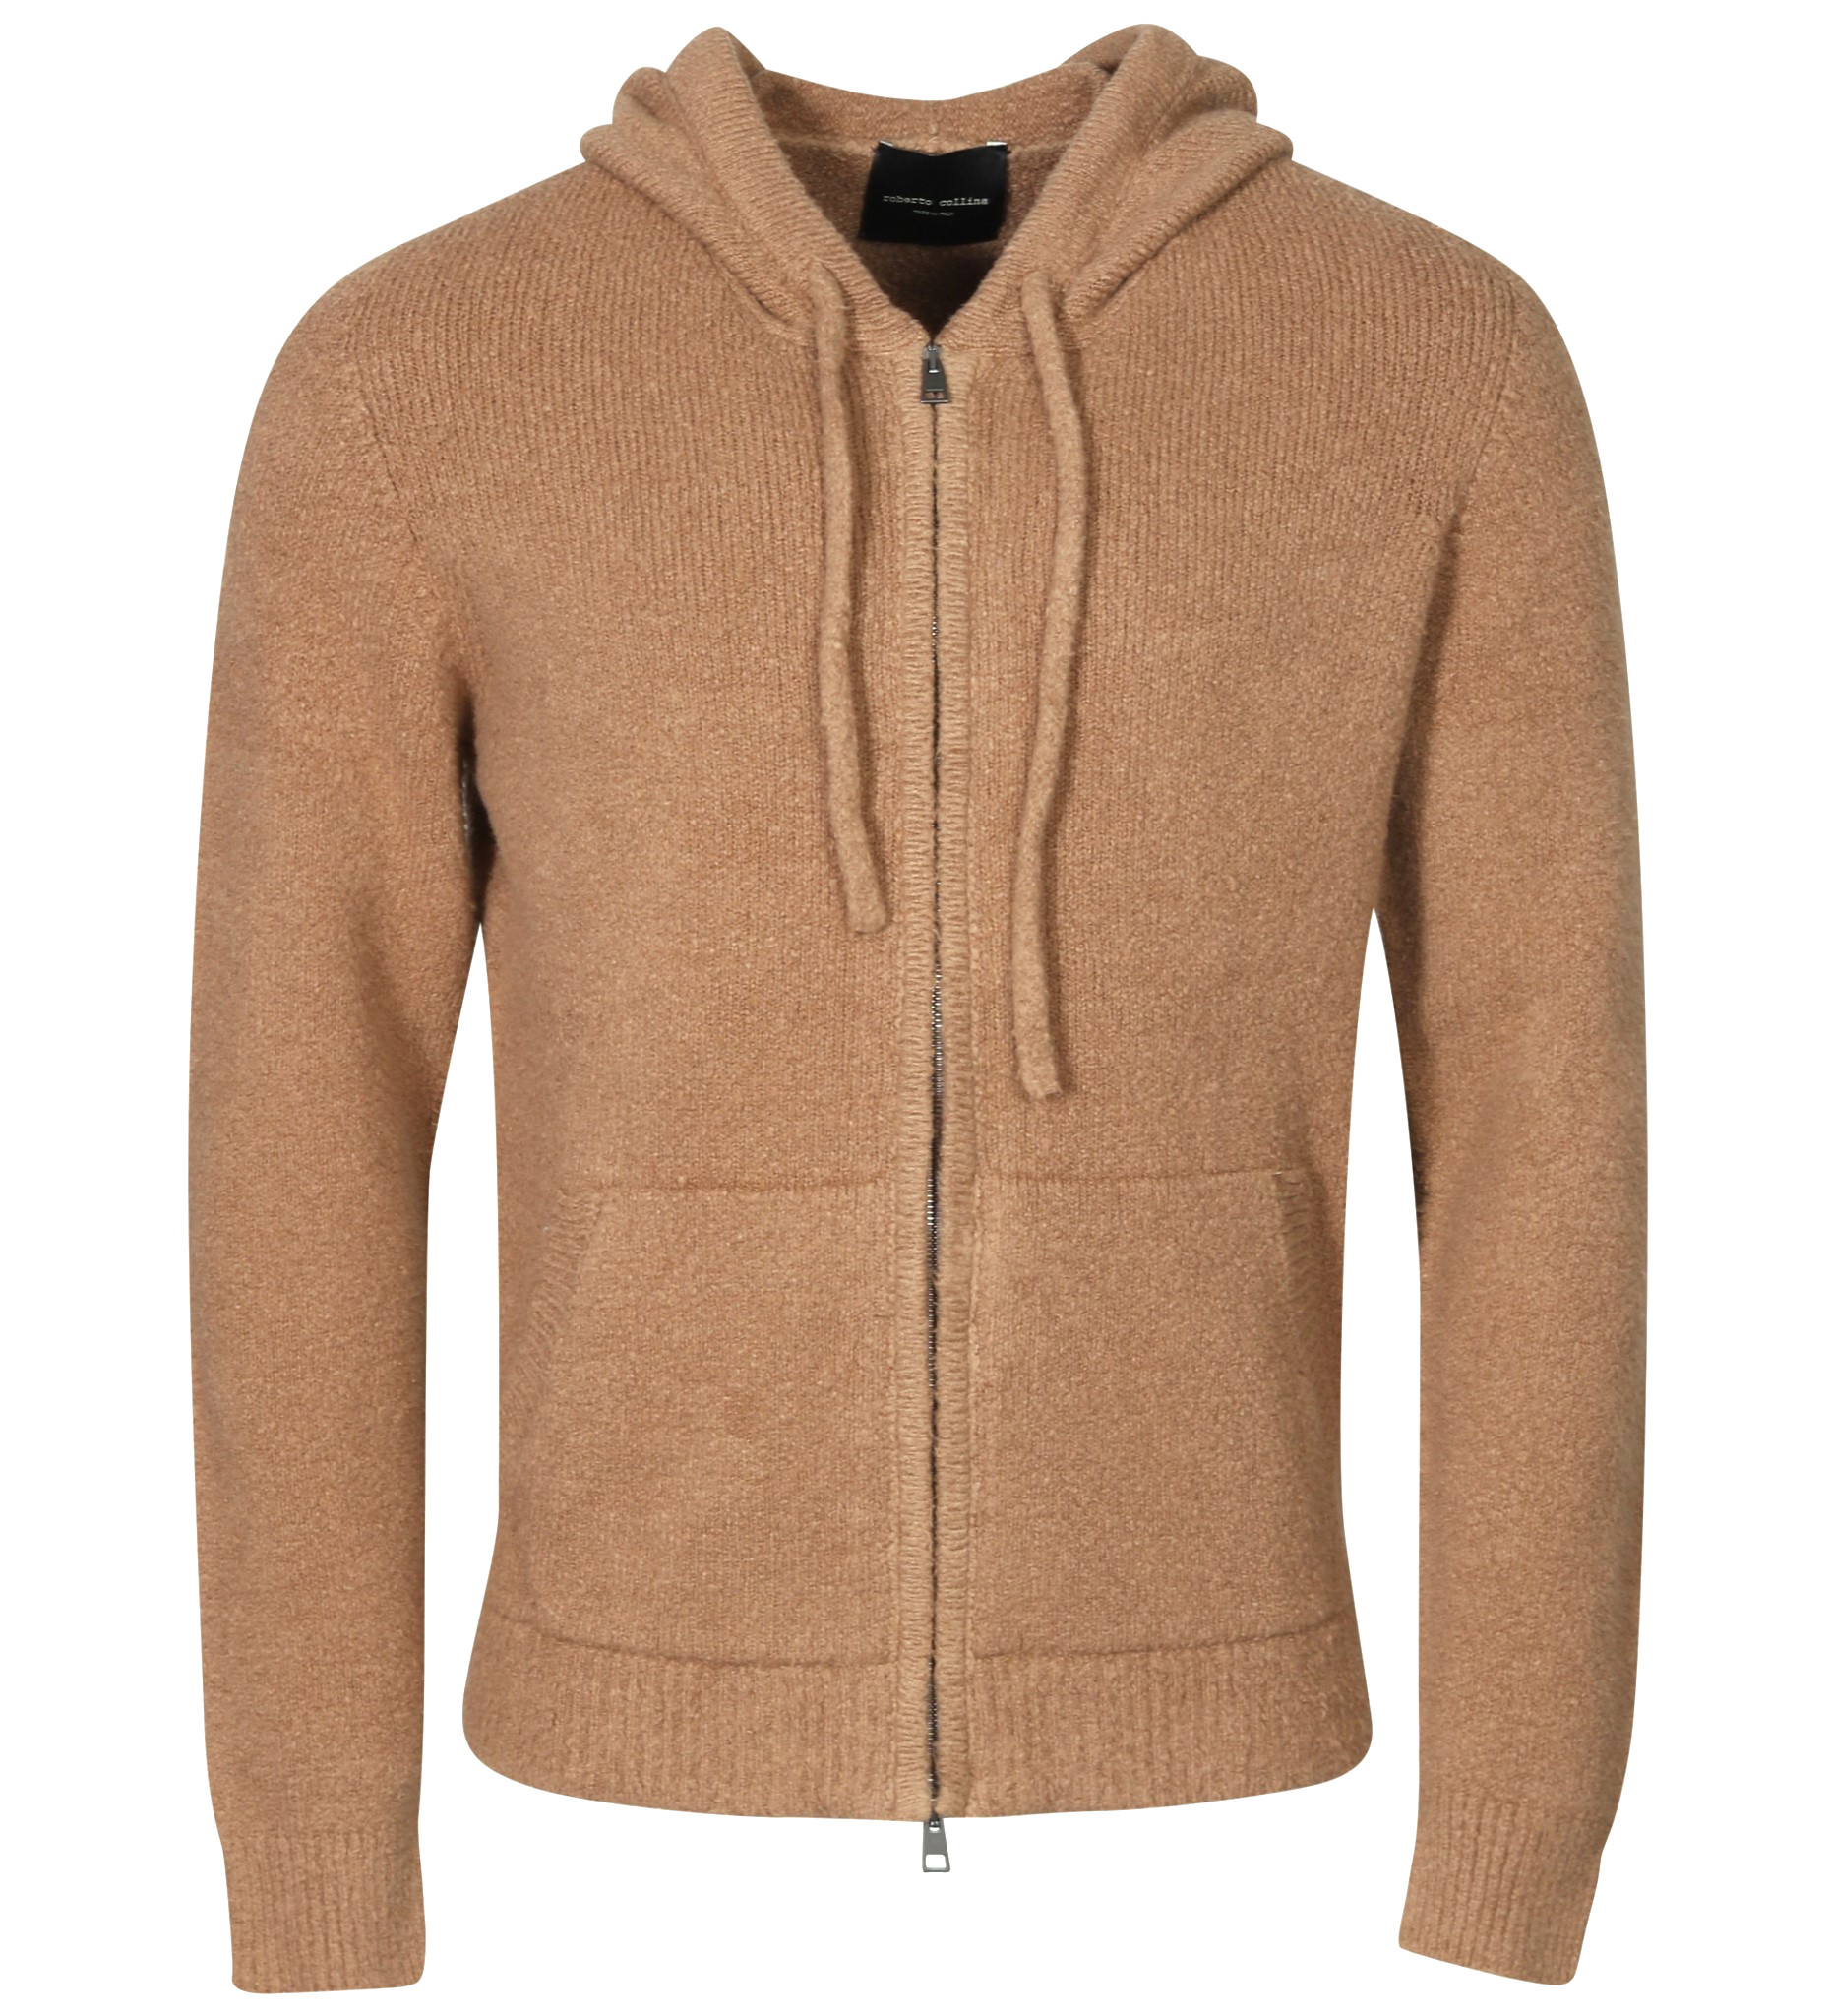 ROBERTO COLLINA Fluffy Cotton Knit Zip Hoodie in Washed Camel